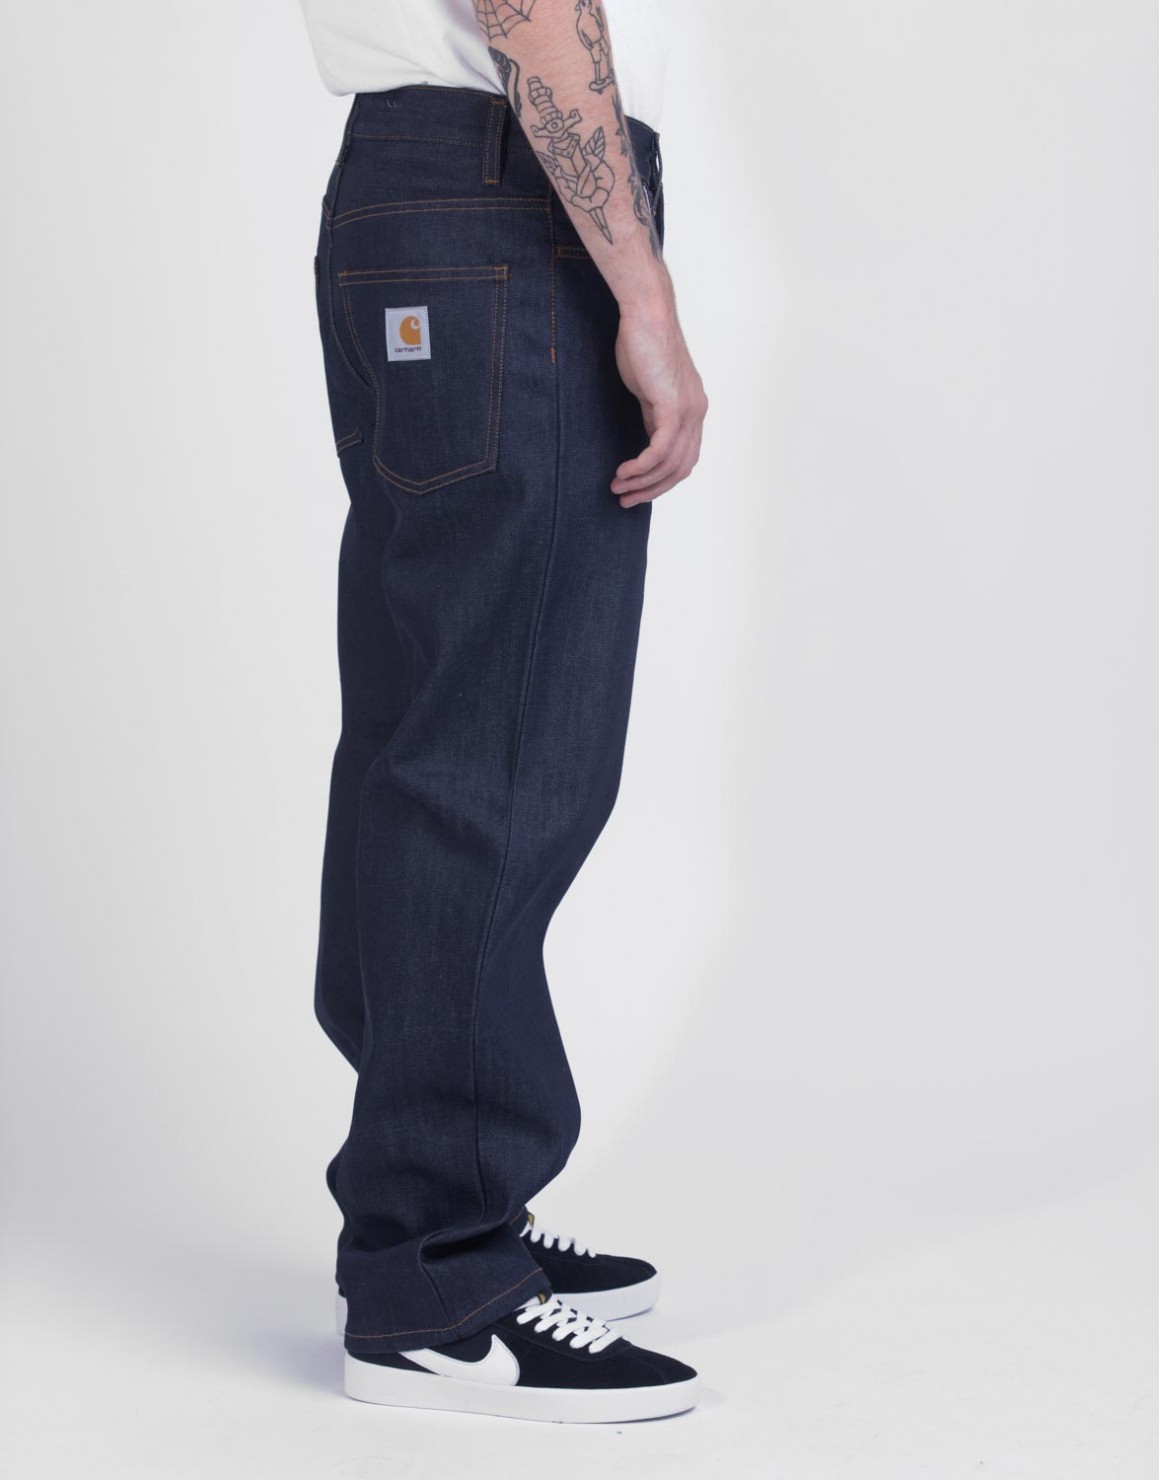 Carhartt Wip Smith Jeans | peacecommission.kdsg.gov.ng